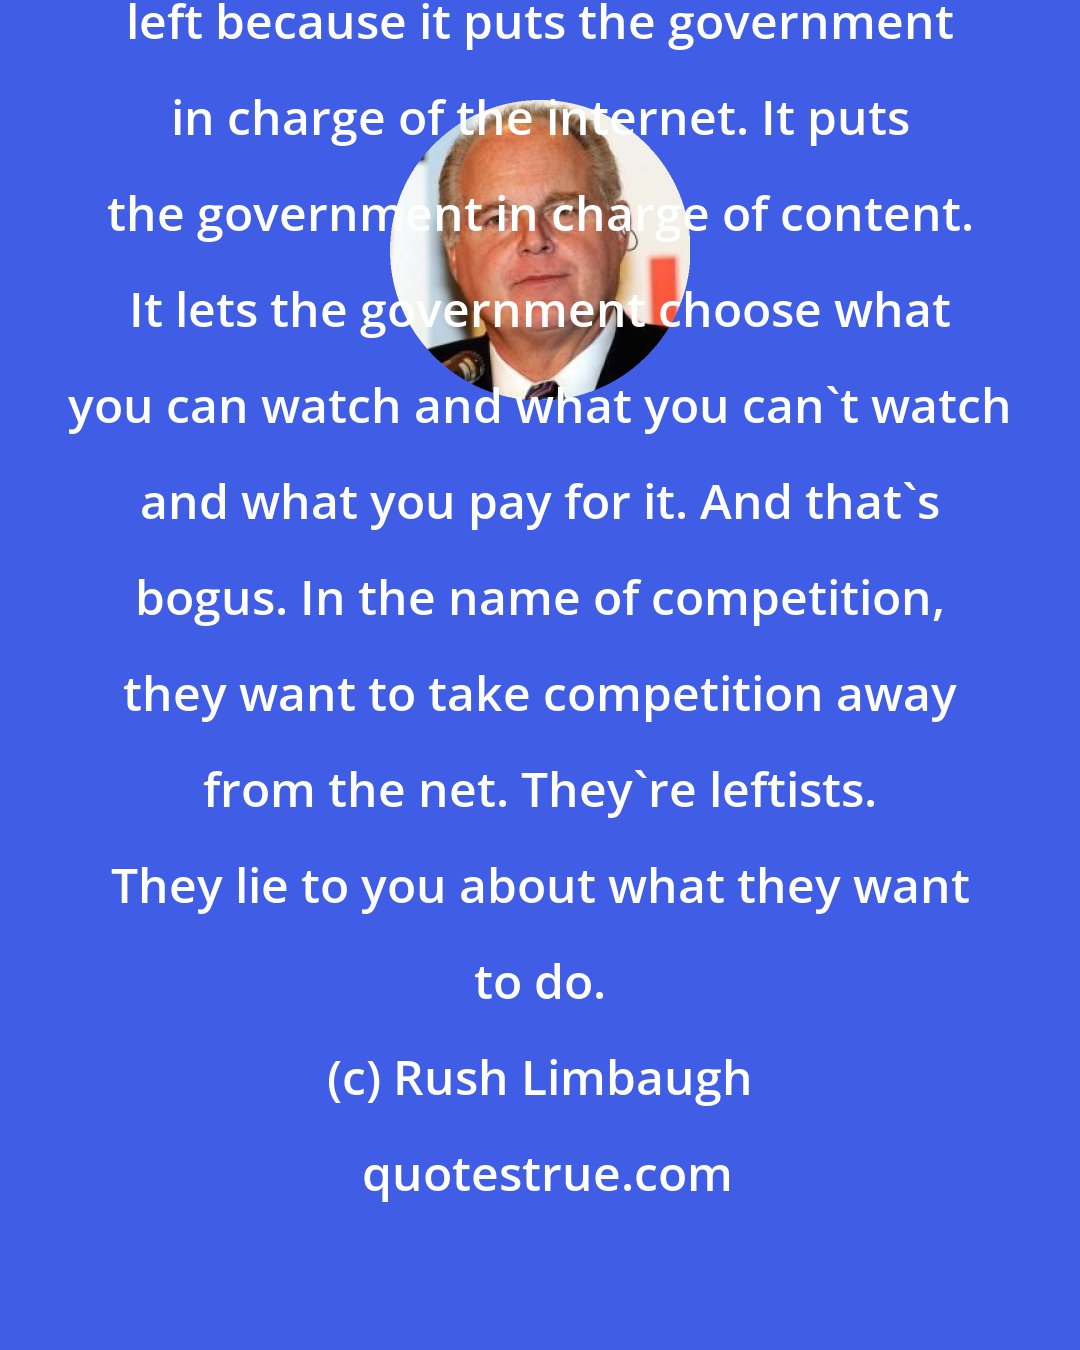 Rush Limbaugh: Net neutrality is a big deal to the left because it puts the government in charge of the internet. It puts the government in charge of content. It lets the government choose what you can watch and what you can't watch and what you pay for it. And that's bogus. In the name of competition, they want to take competition away from the net. They're leftists. They lie to you about what they want to do.